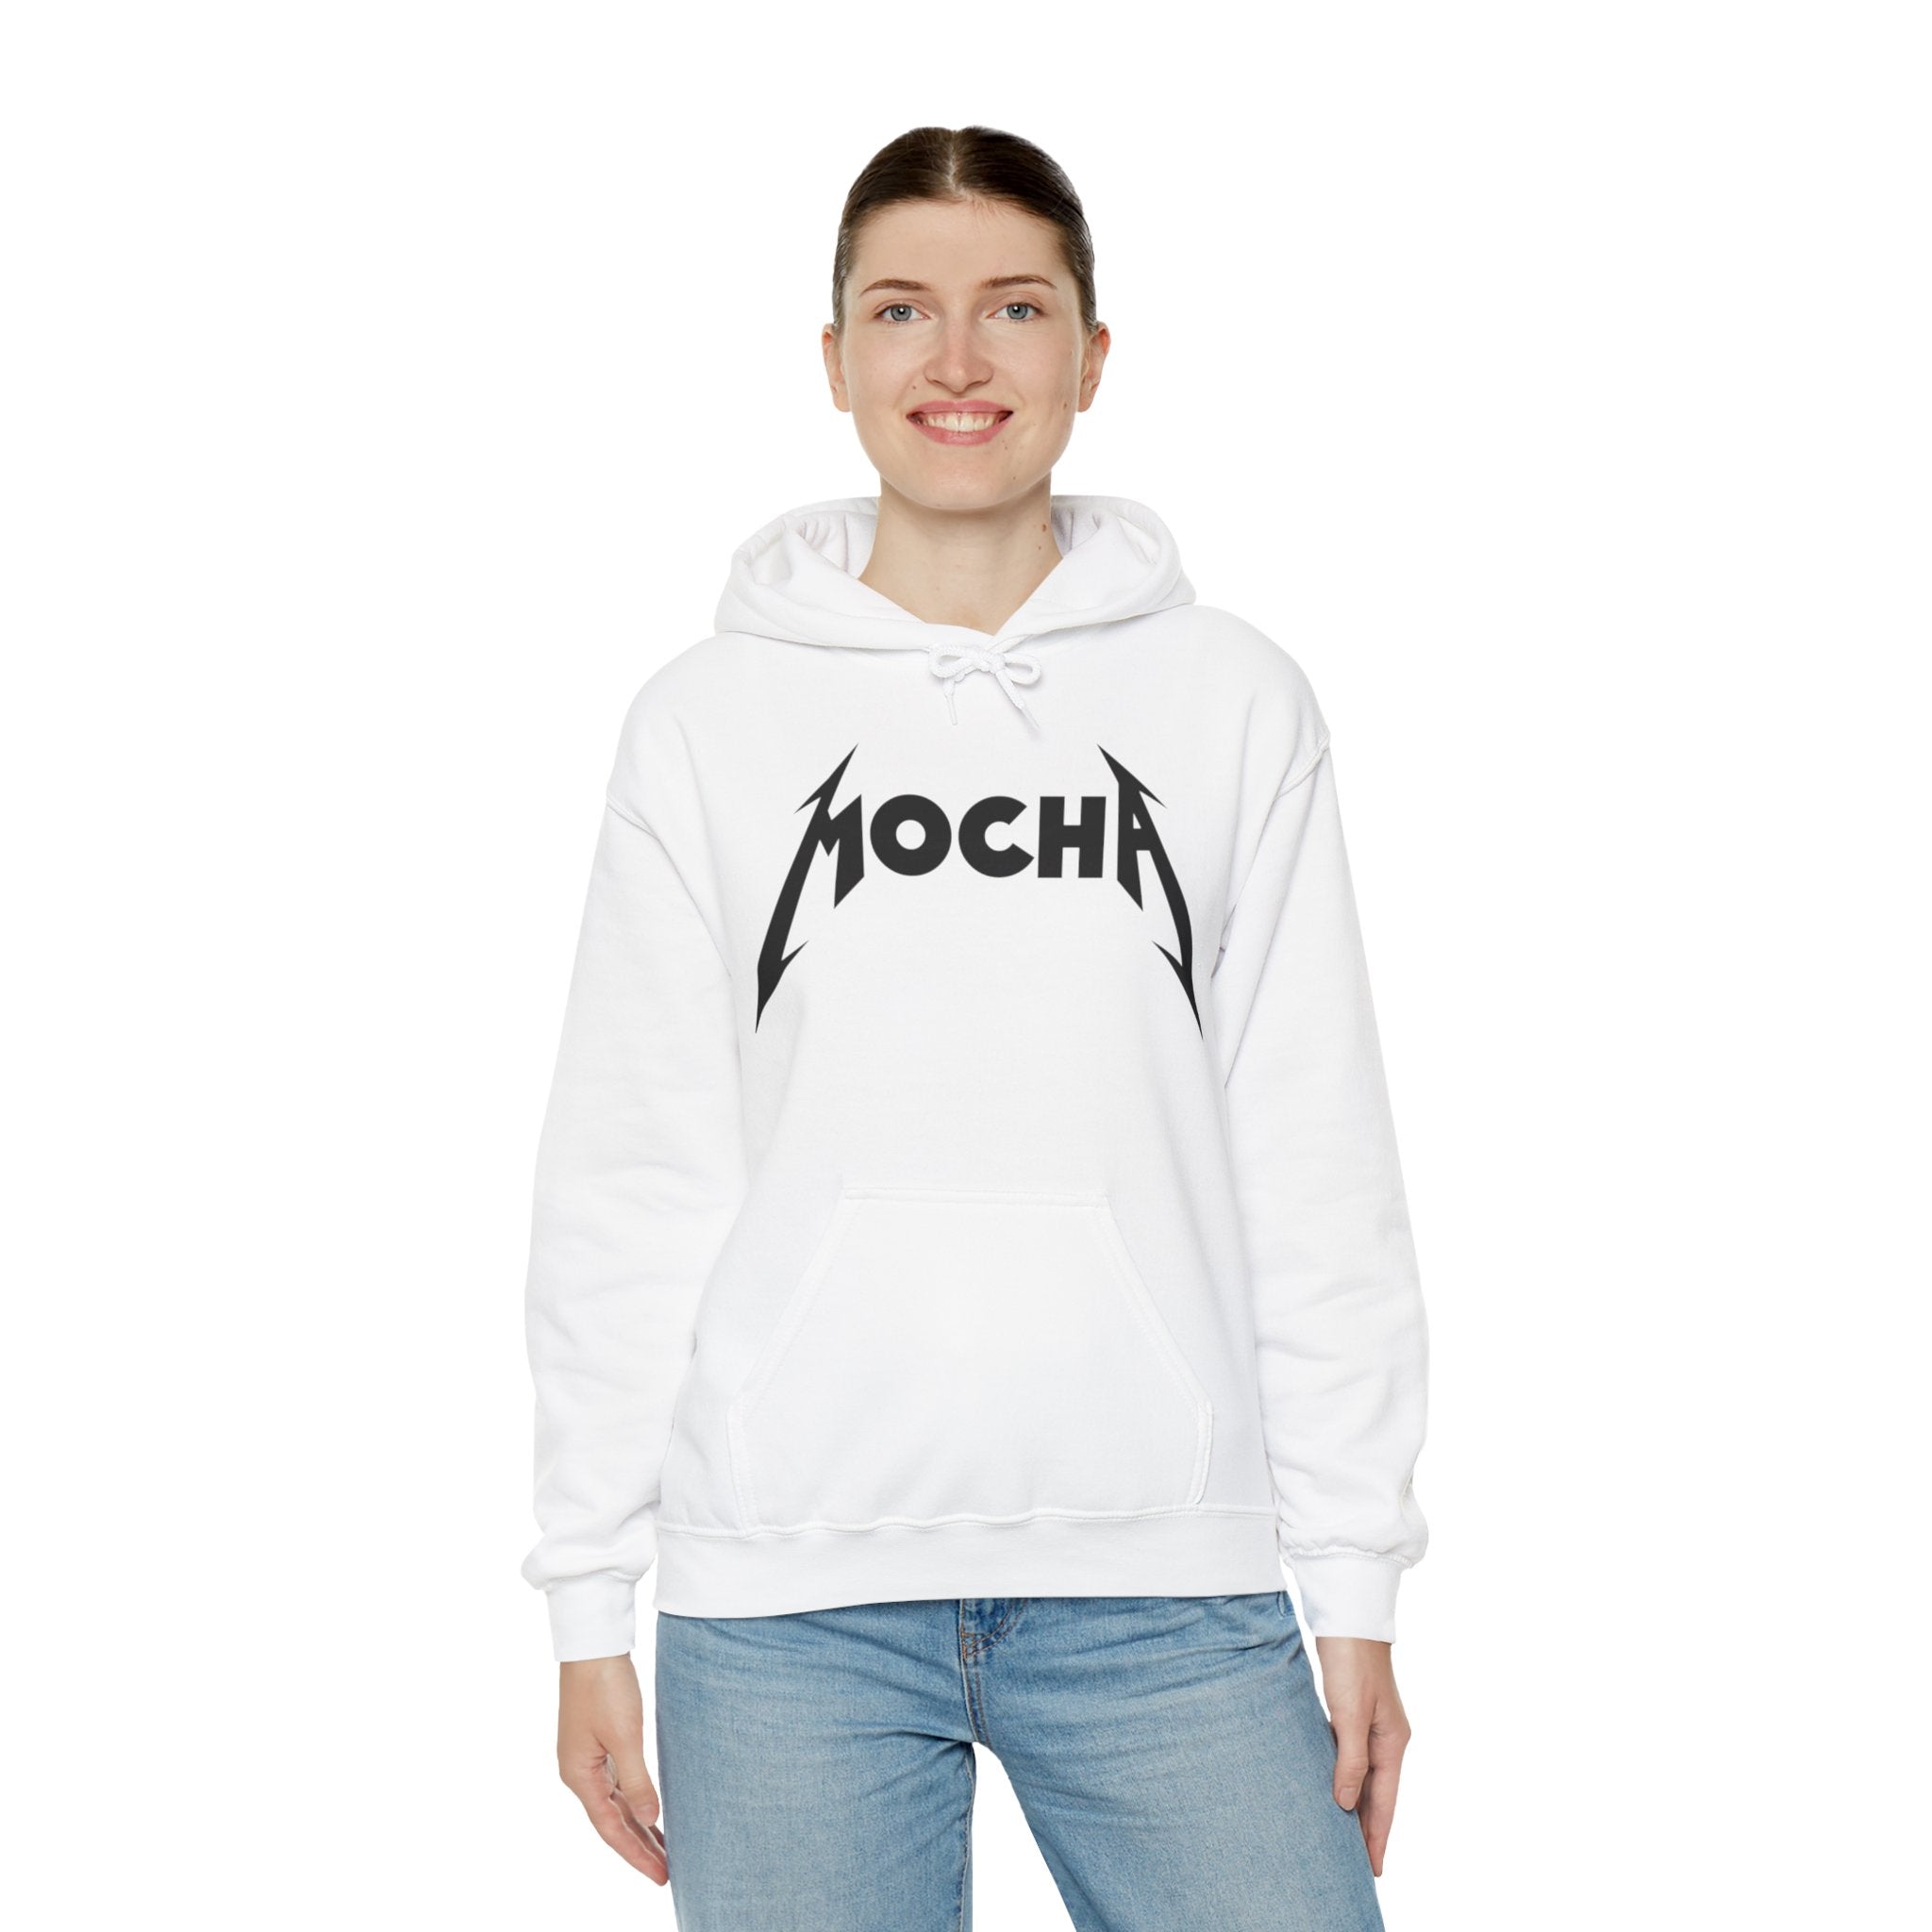 A person wearing a white Mocha - Hooded Sweatshirt with the word "MOCHA" in bold, stylized letters stands facing the camera, smiling, and posing with hands down. The hoodie, known for its style and comfort, features a front pouch pocket and drawstrings for a unique and tasteful look.